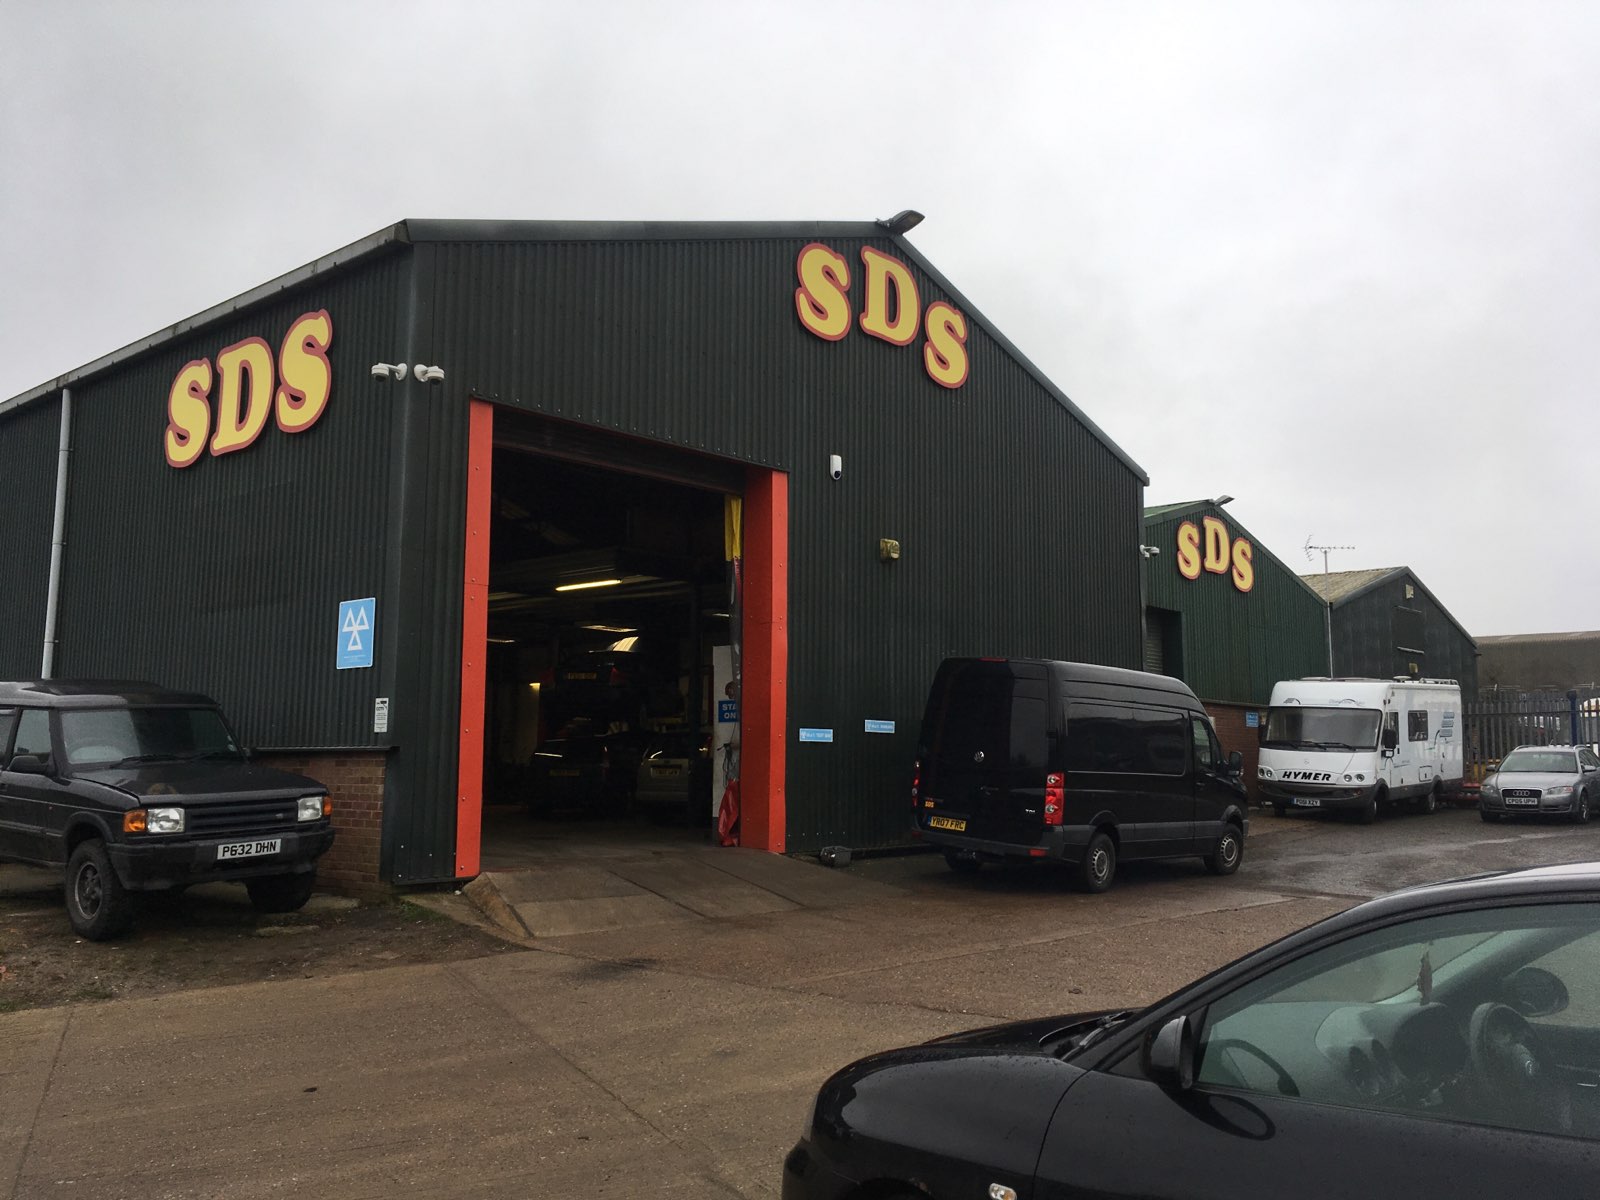 MOT Daventry - looking for a reliable MOT garage around Daventry? Come to SDS MOT in Daventry